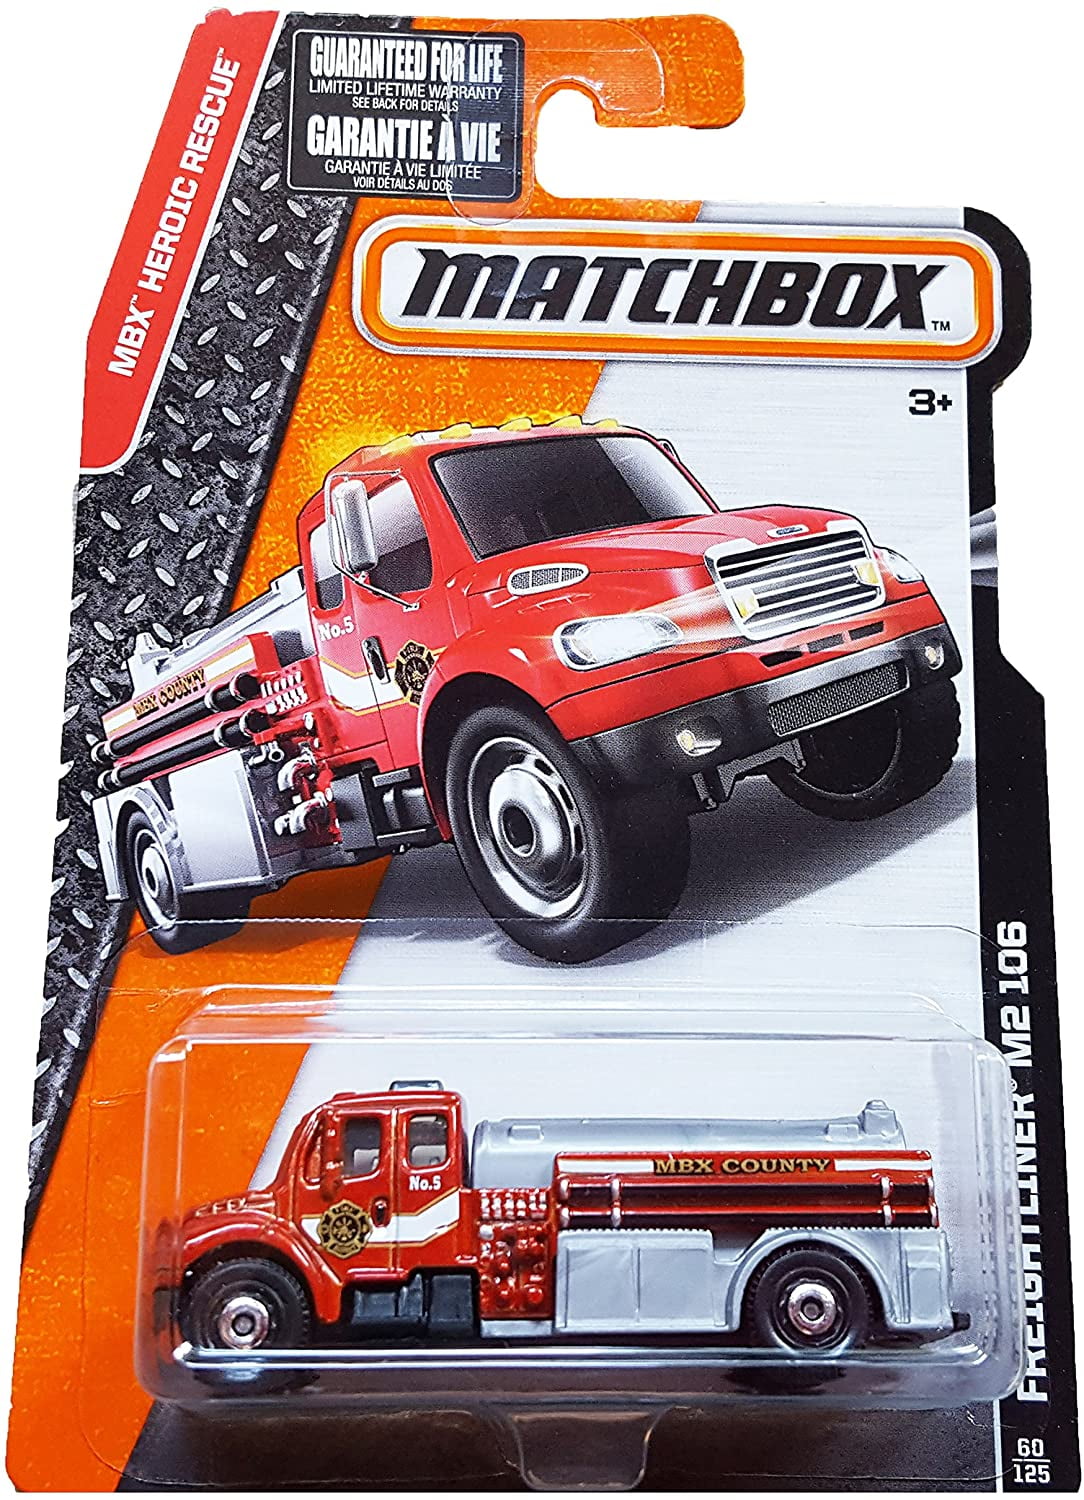 Matchbox 16 Mbx Heroic Rescue Freightliner M2 106 Fire Truck Red 60 125 1 64 Scaled Die Cast Fire Truck By Visit The Matchbox Store Walmart Com Walmart Com